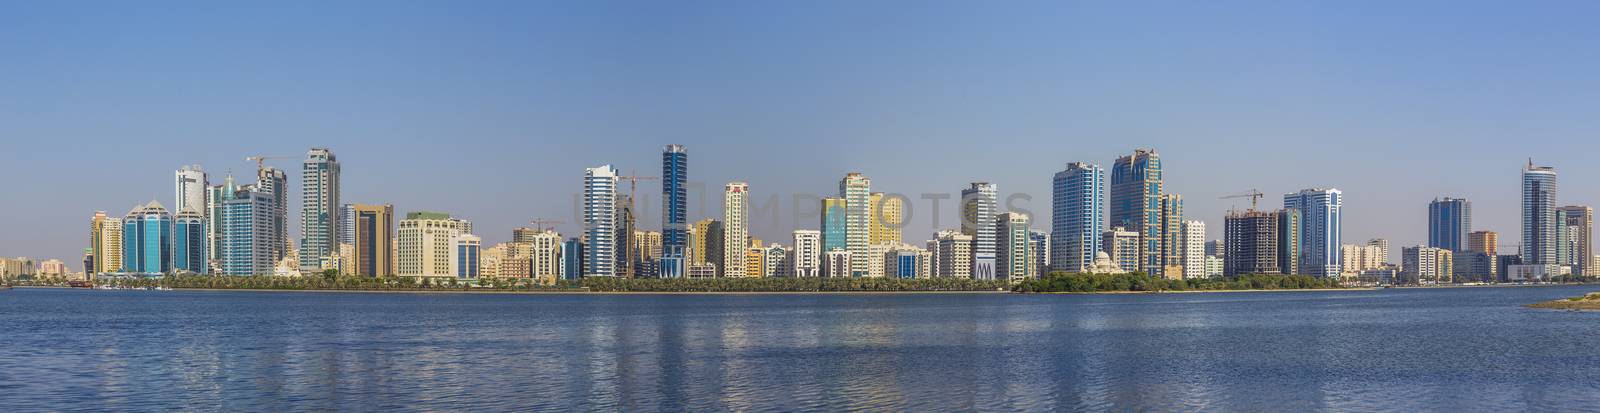 Sharjah - third largest and most populous city in UAE by oleg_zhukov